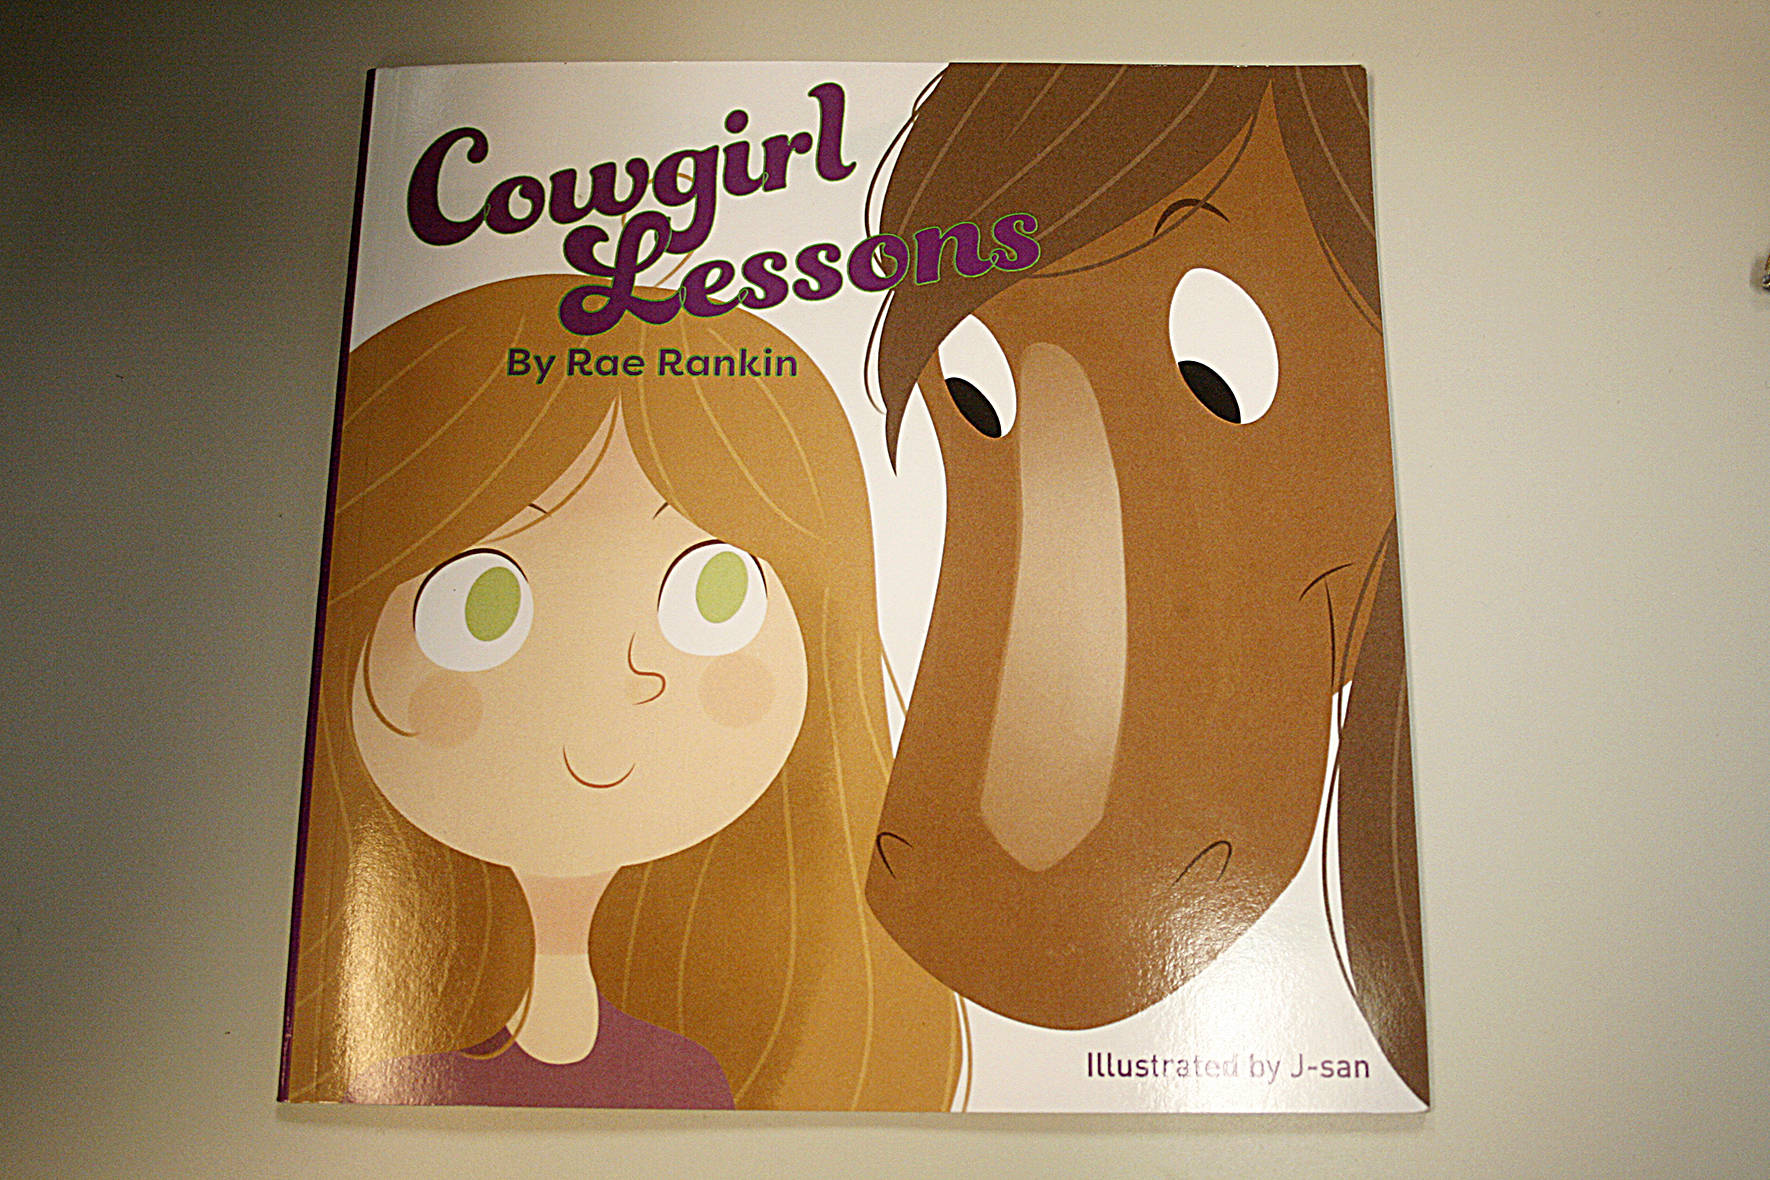 Rae Rankin wrote “Cowgirl Lessons” for her daughter when her favorite horse died. The story follows a little girl, fashioned after Rankin’s daughter, who spends the day taking care of her horse. LEAH ABRAHAM, RENTON REPORTER